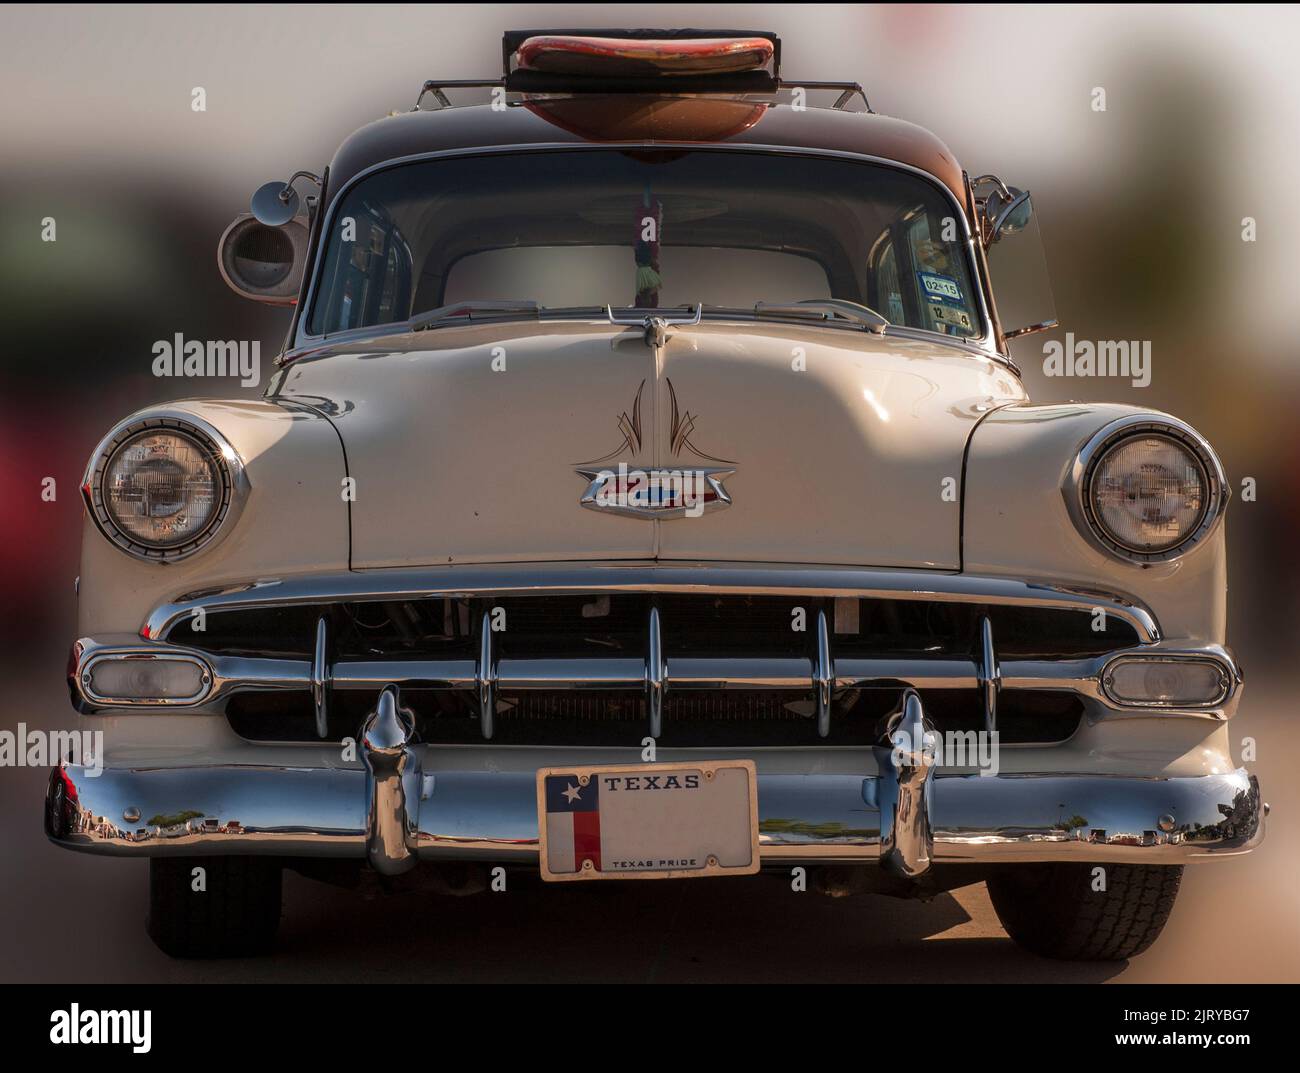 The 1954 Chevrolet Station Wagon grille work is an example of the American automotive art form that became popular in the 1950's and 1960's. Stock Photo